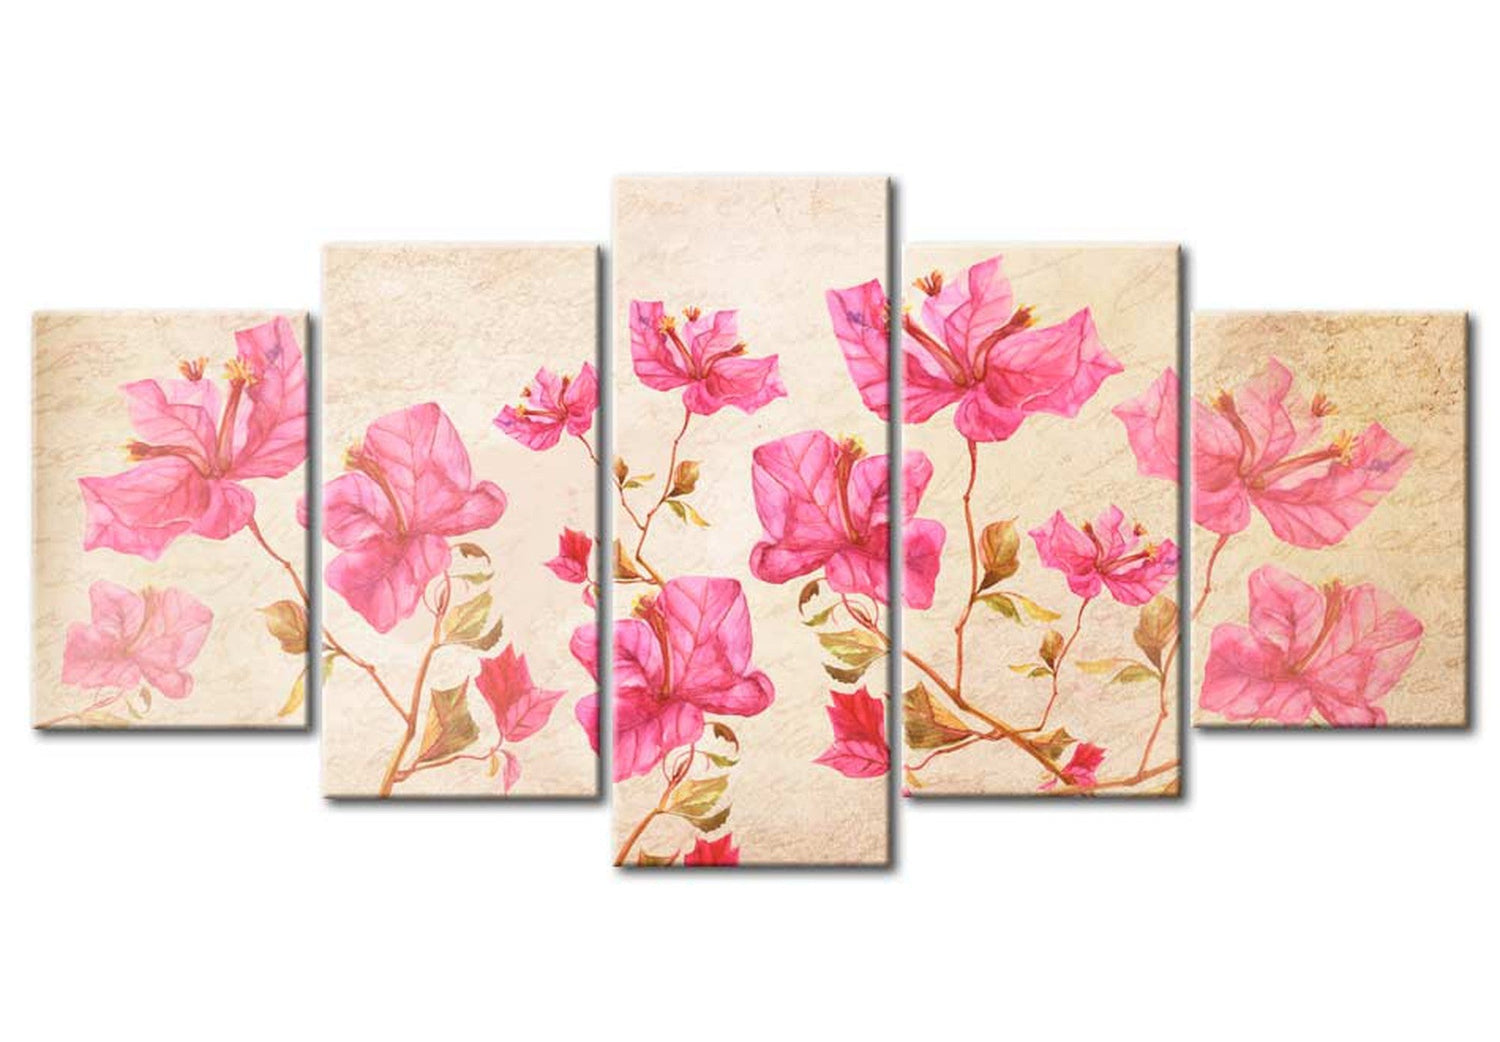 Floral Canvas Wall Art - Flowers In Pink - 5 Pieces